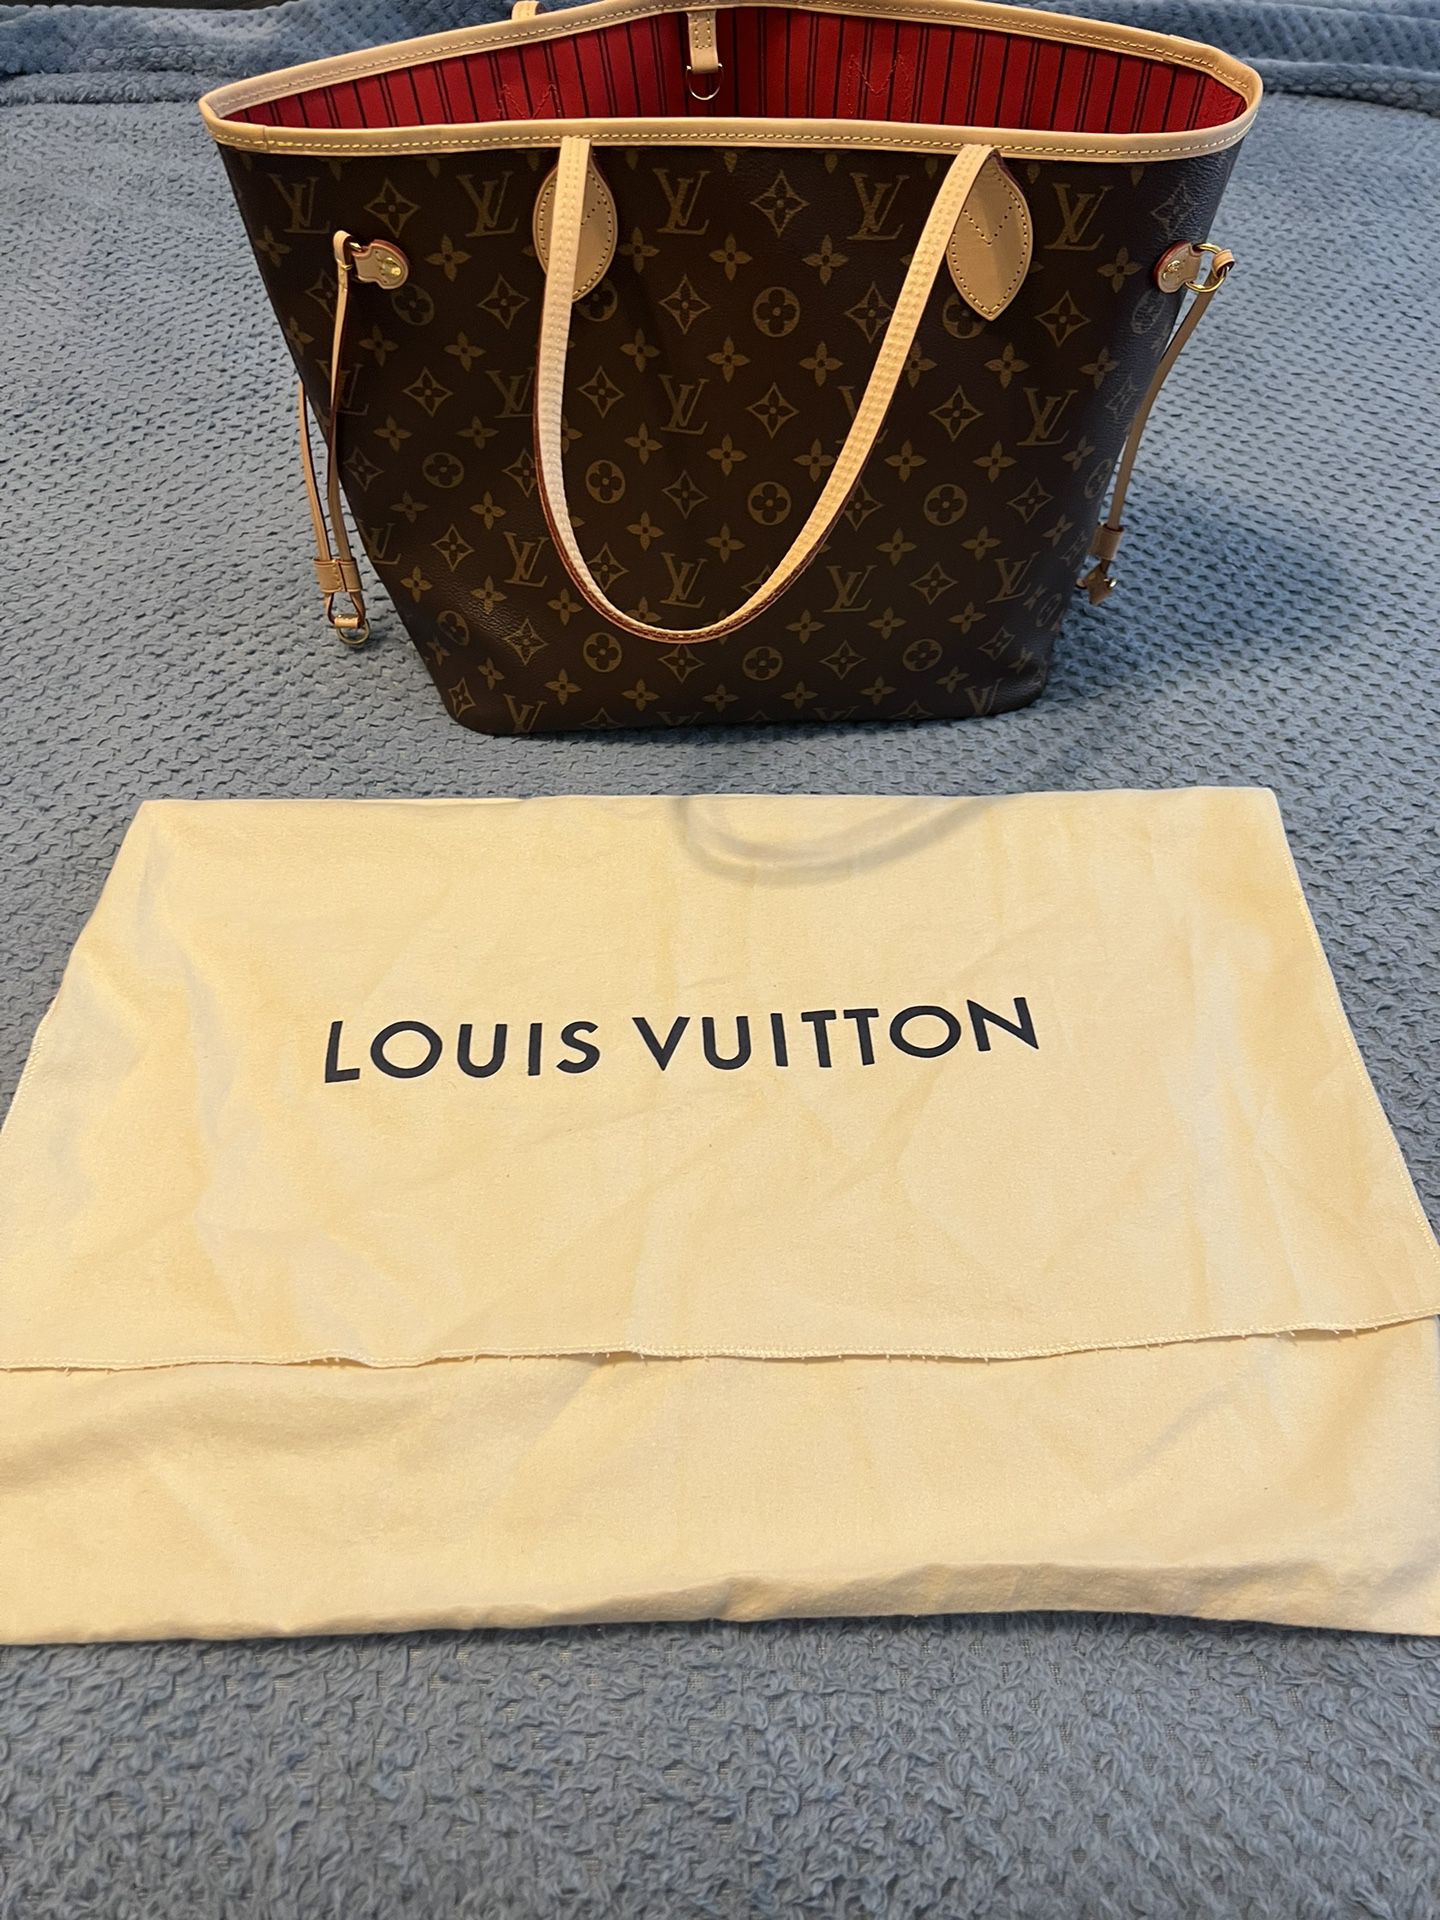 Authentic Louis Vuitton Brooklyn MM for Sale in Hiram, GA - OfferUp